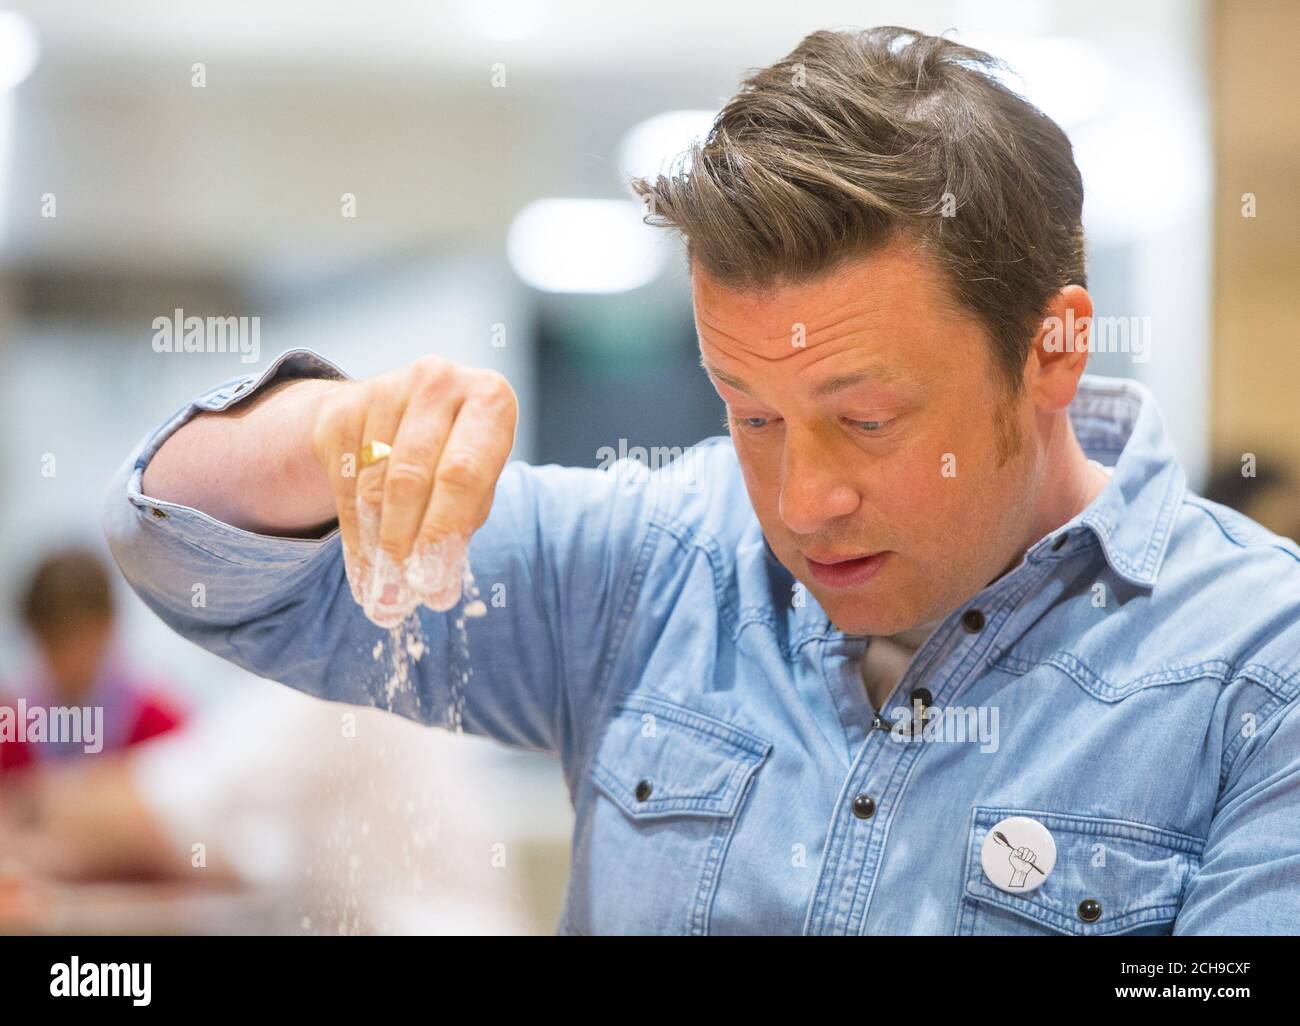 Jamie Oliver makes bread with pupils at Kings Cross Academy in London, during a visit on Food Revolution Day, part of the Food Revolution campaign which aims to tackle issues of child nutrition. Stock Photo